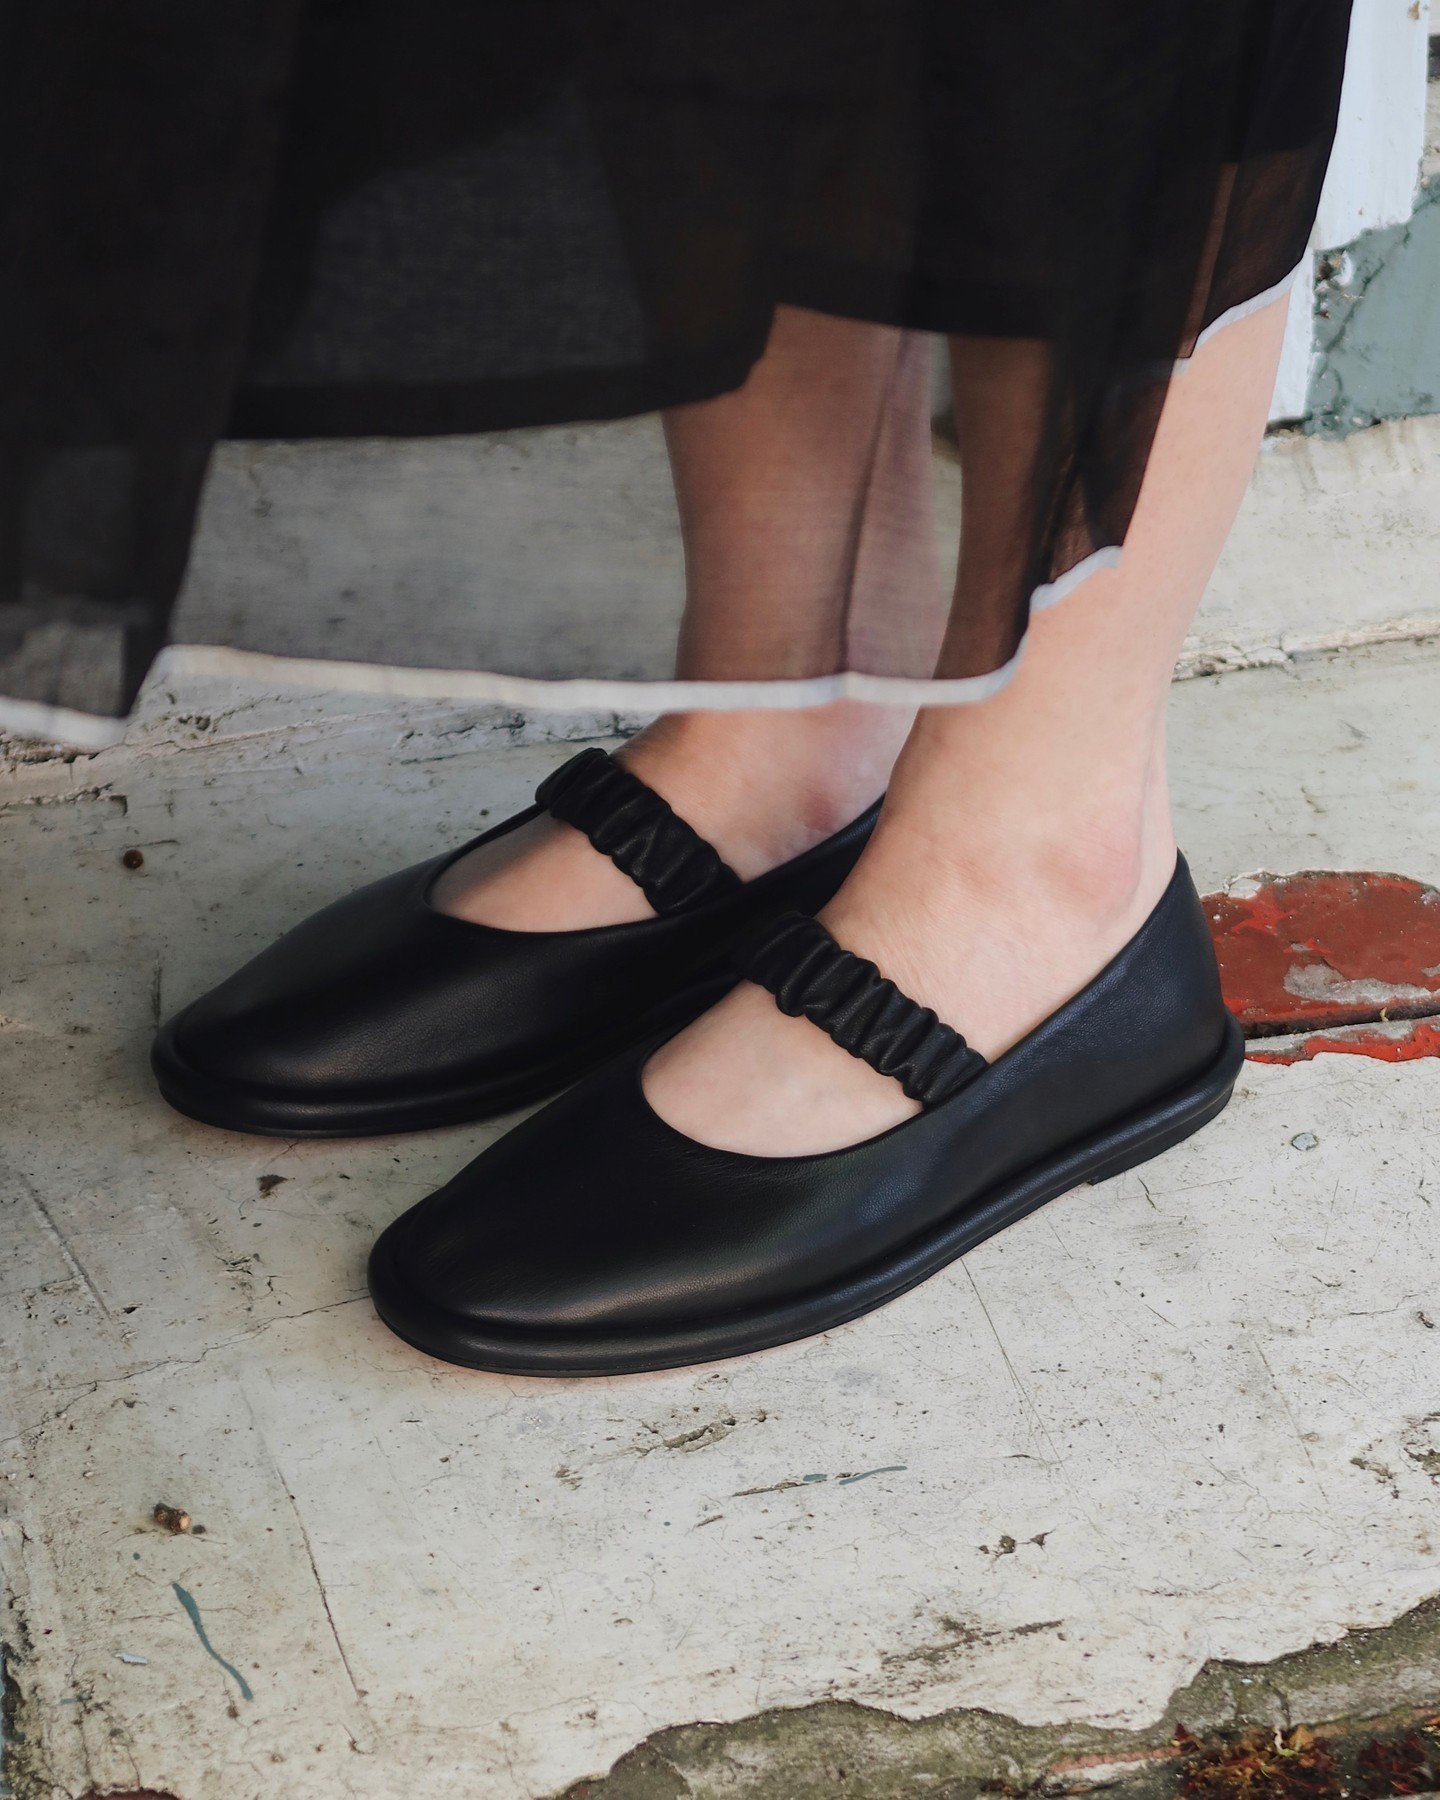 The Ruche Ballet Flat from @laurenmanoogian 🖤